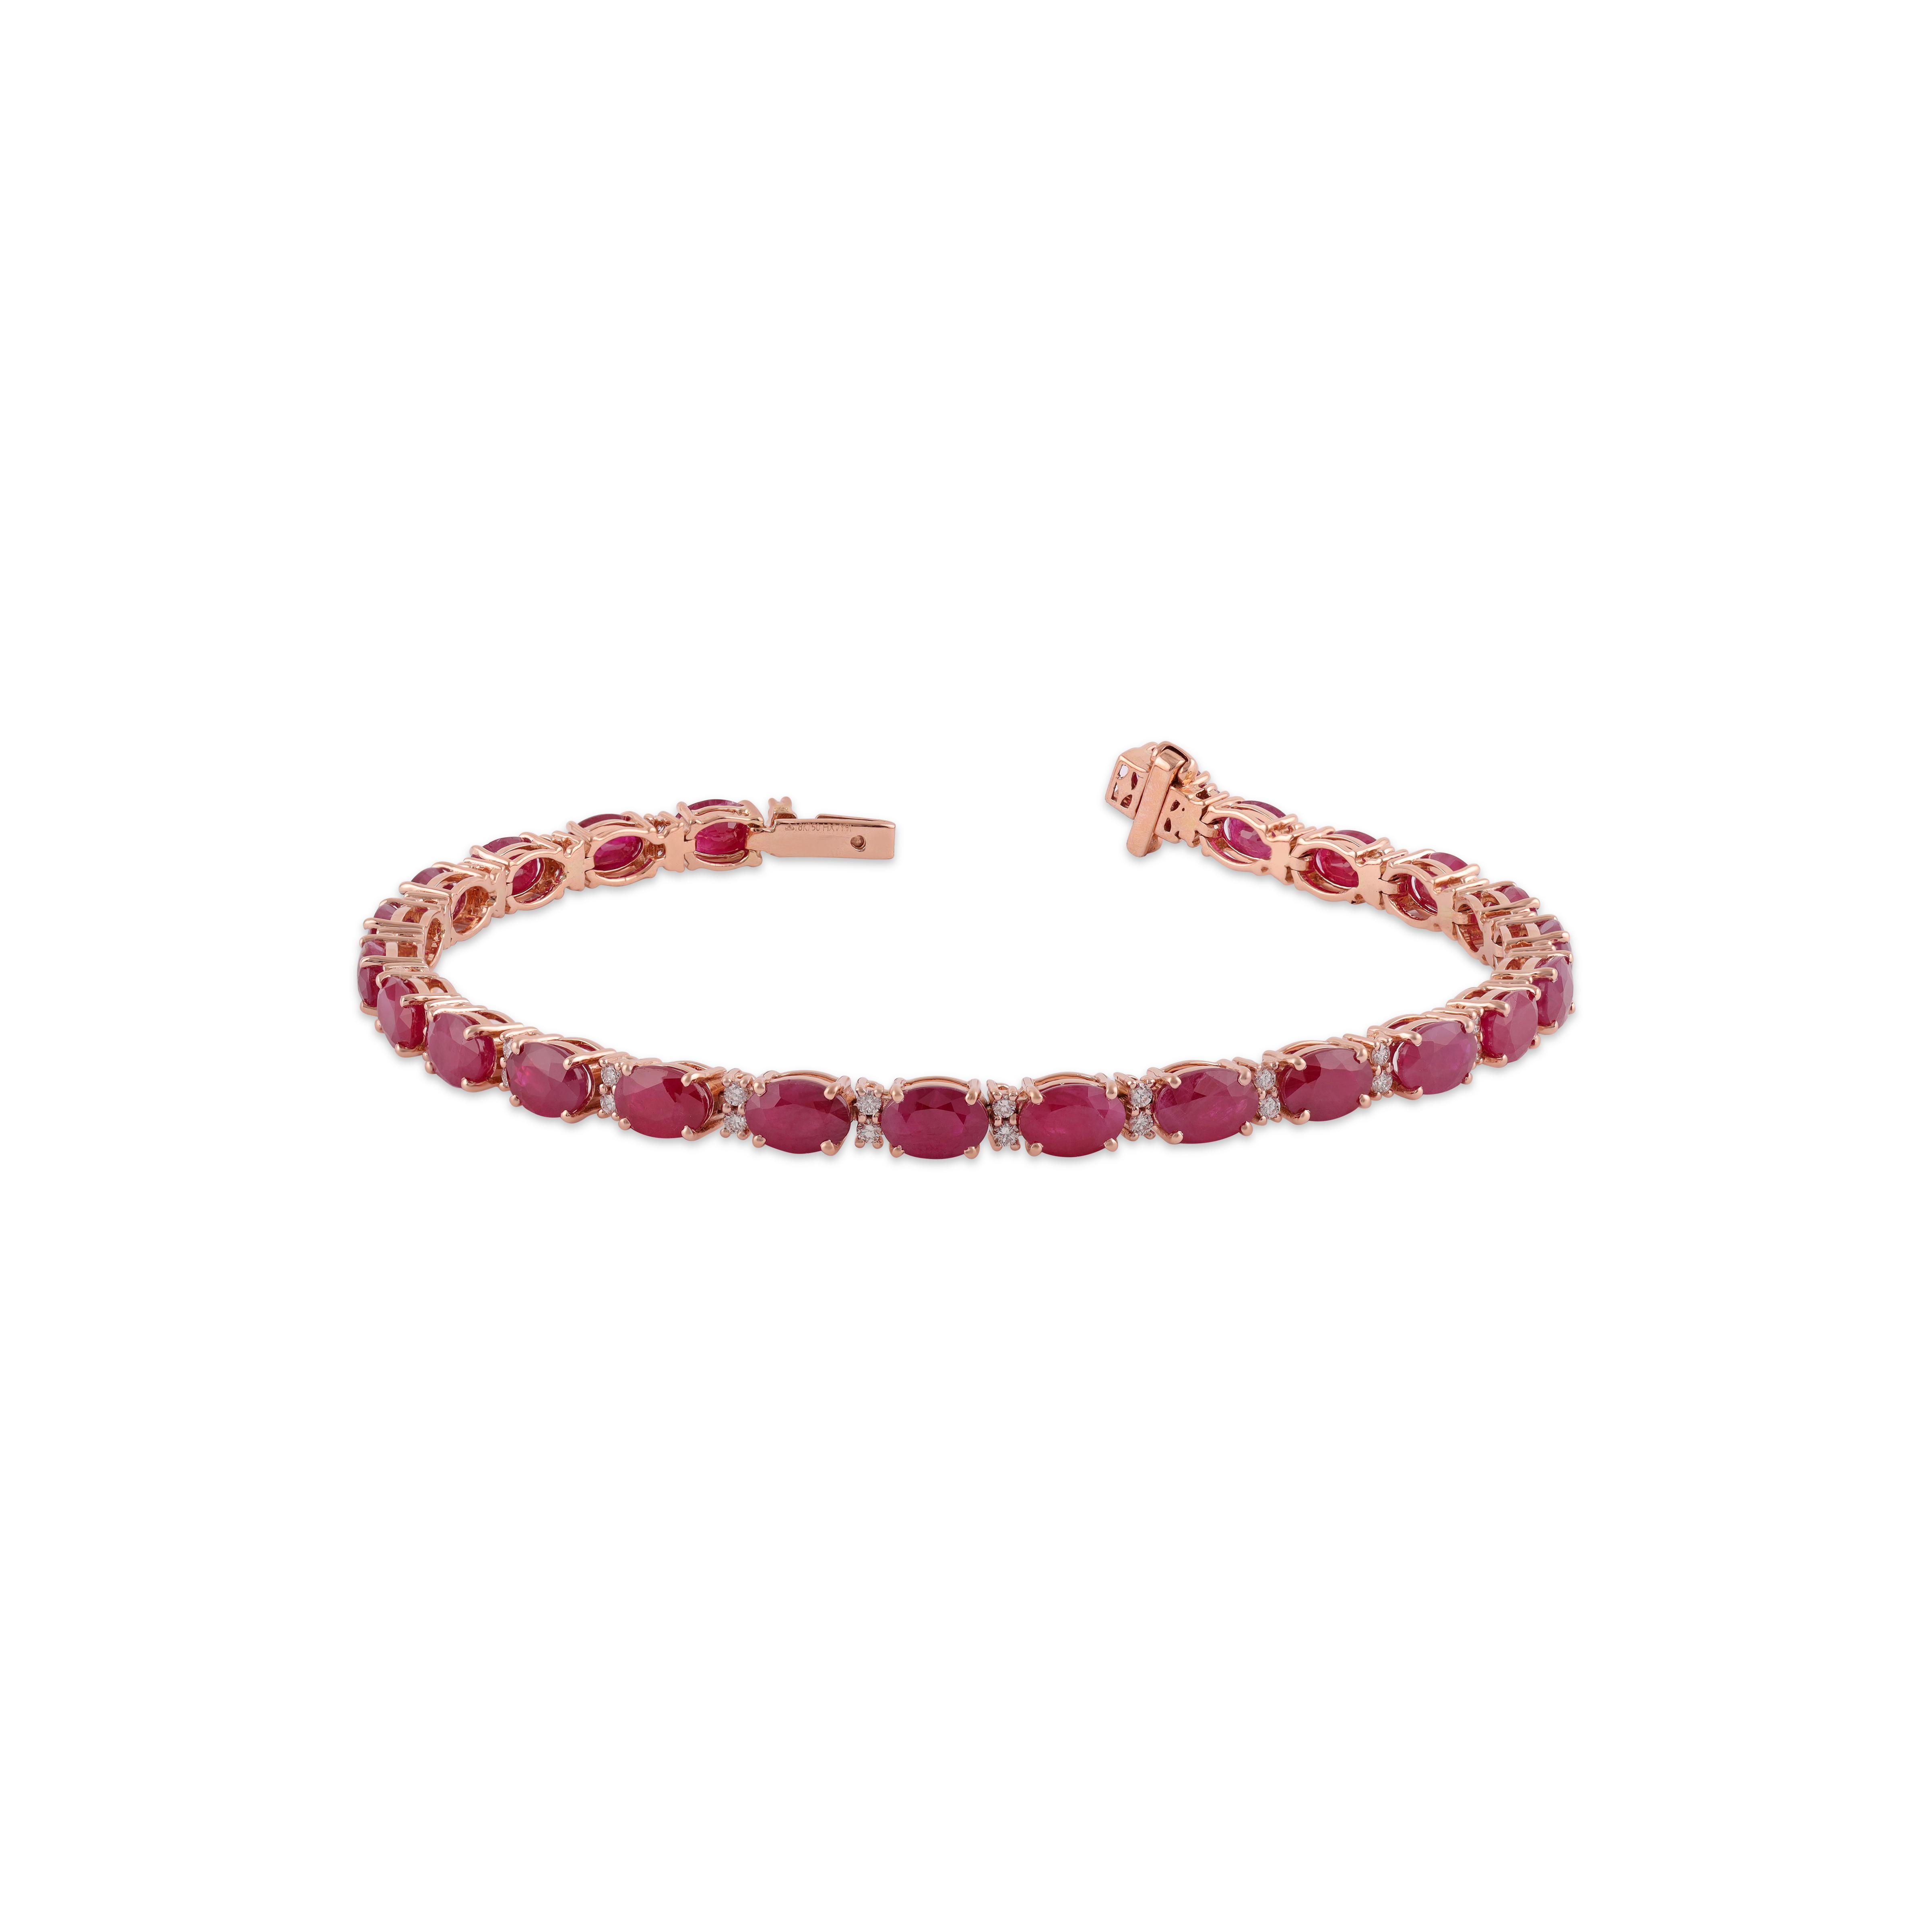 14.75 Carat Ruby and Diamond  Bracelet in 18K Rose Gold

This magnificent Oval shape Ruby tennis bracelet is incredulous. The solitaire Oval-shaped Oval-cut Ruby
 are beautifully With  Diamonds making the bracelet more graceful and adding